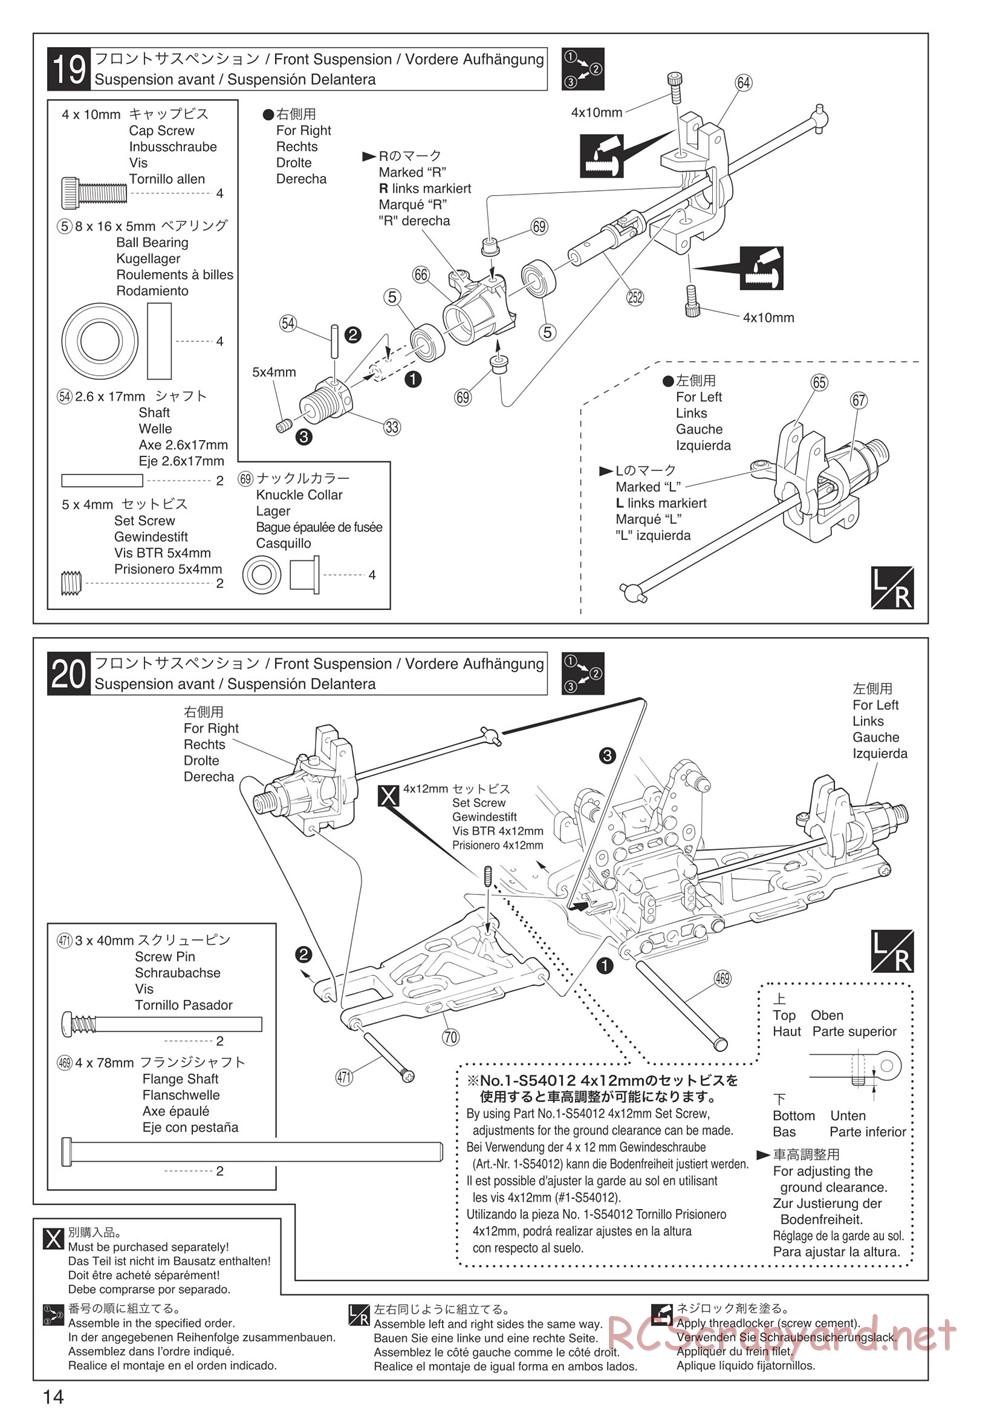 Kyosho - Inferno Neo 3.0 - Manual - Page 14